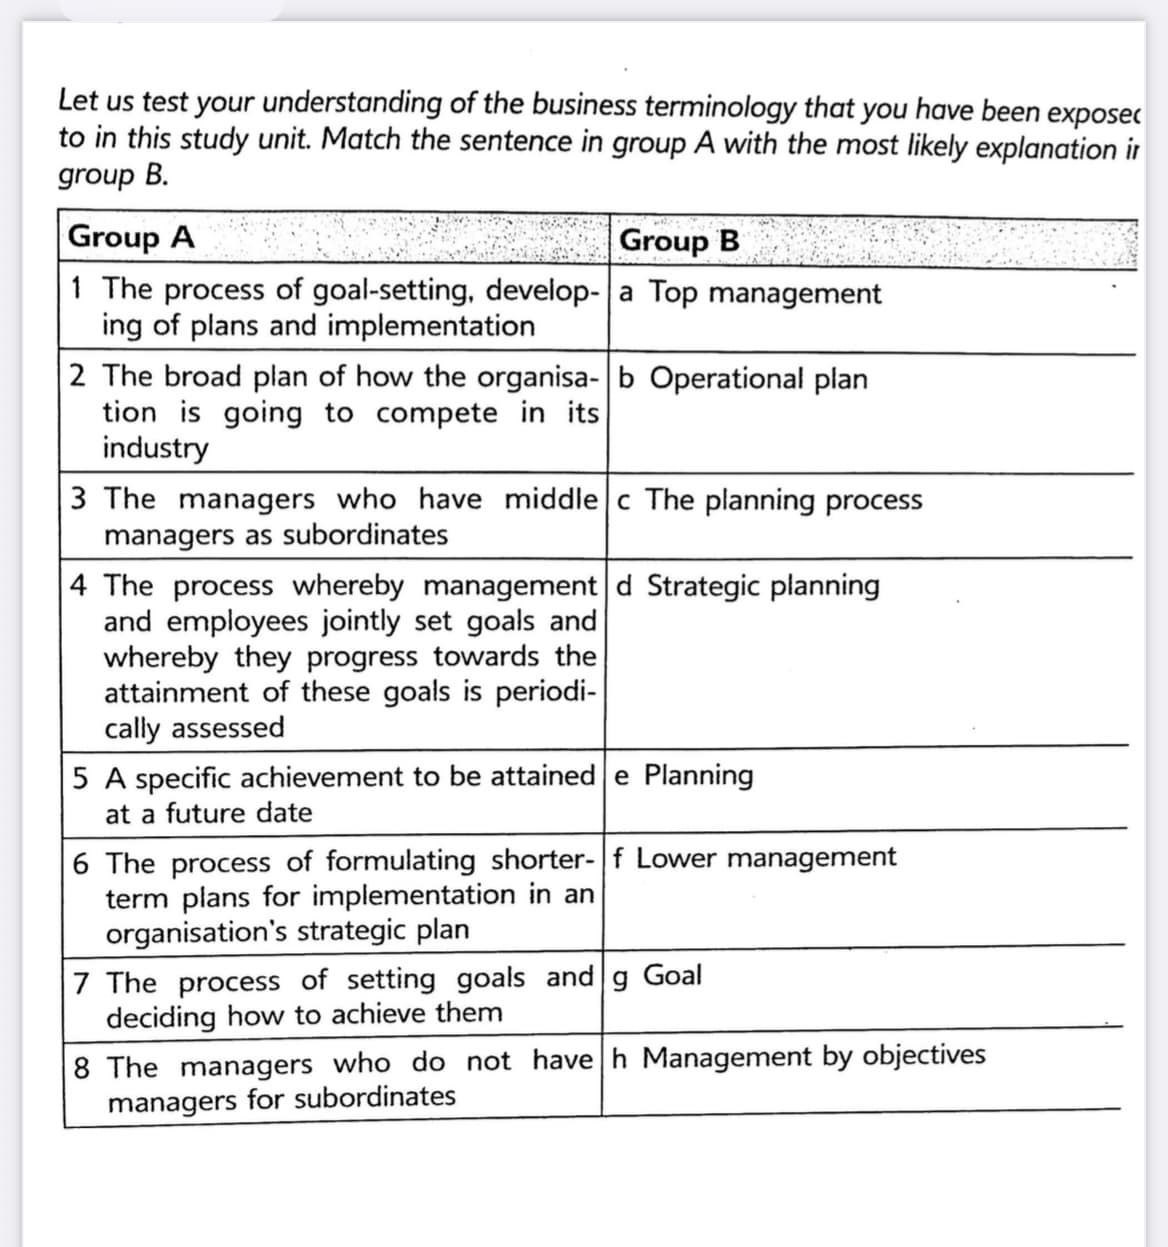 Let us test your understanding of the business terminology that you have been exposec
to in this study unit. Match the sentence in group A with the most likely explanation ir
group B.
Group A
1 The process of goal-setting, develop- a Top management
ing of plans and implementation
Group B
2 The broad plan of how the organisa- b Operational plan
tion is going to compete in its
industry
3 The managers who have middle c The planning process
managers as subordinates
4 The process whereby management d Strategic planning
and employees jointly set goals and
whereby they progress towards the
attainment of these goals is periodi-
cally assessed
5 A specific achievement to be attained e Planning
at a future date
6 The process of formulating shorter- f Lower management
term plans for implementation in an
organisation's strategic plan
7 The process of setting goals and g Goal
deciding how to achieve them
8 The managers who do not have h Management by objectives
managers for subordinates
